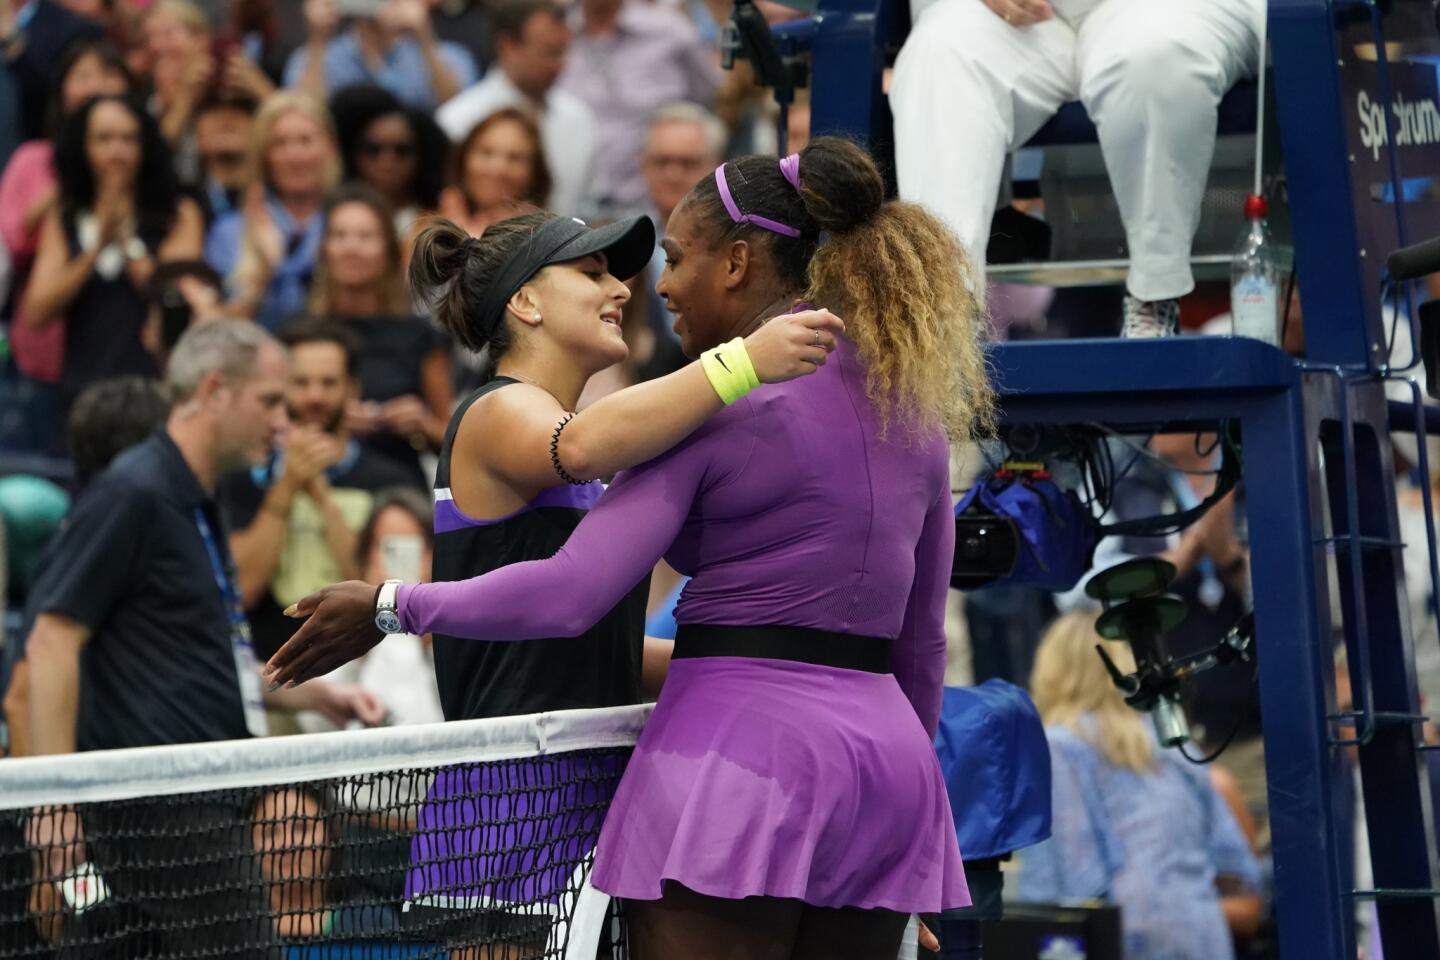 Bianca Andreescu, left, hugs Serena Williams after defeating her during the Women's Singles final match inside the Billie Jean King National Tennis Center on Sept. 7, 2019, in Queens.